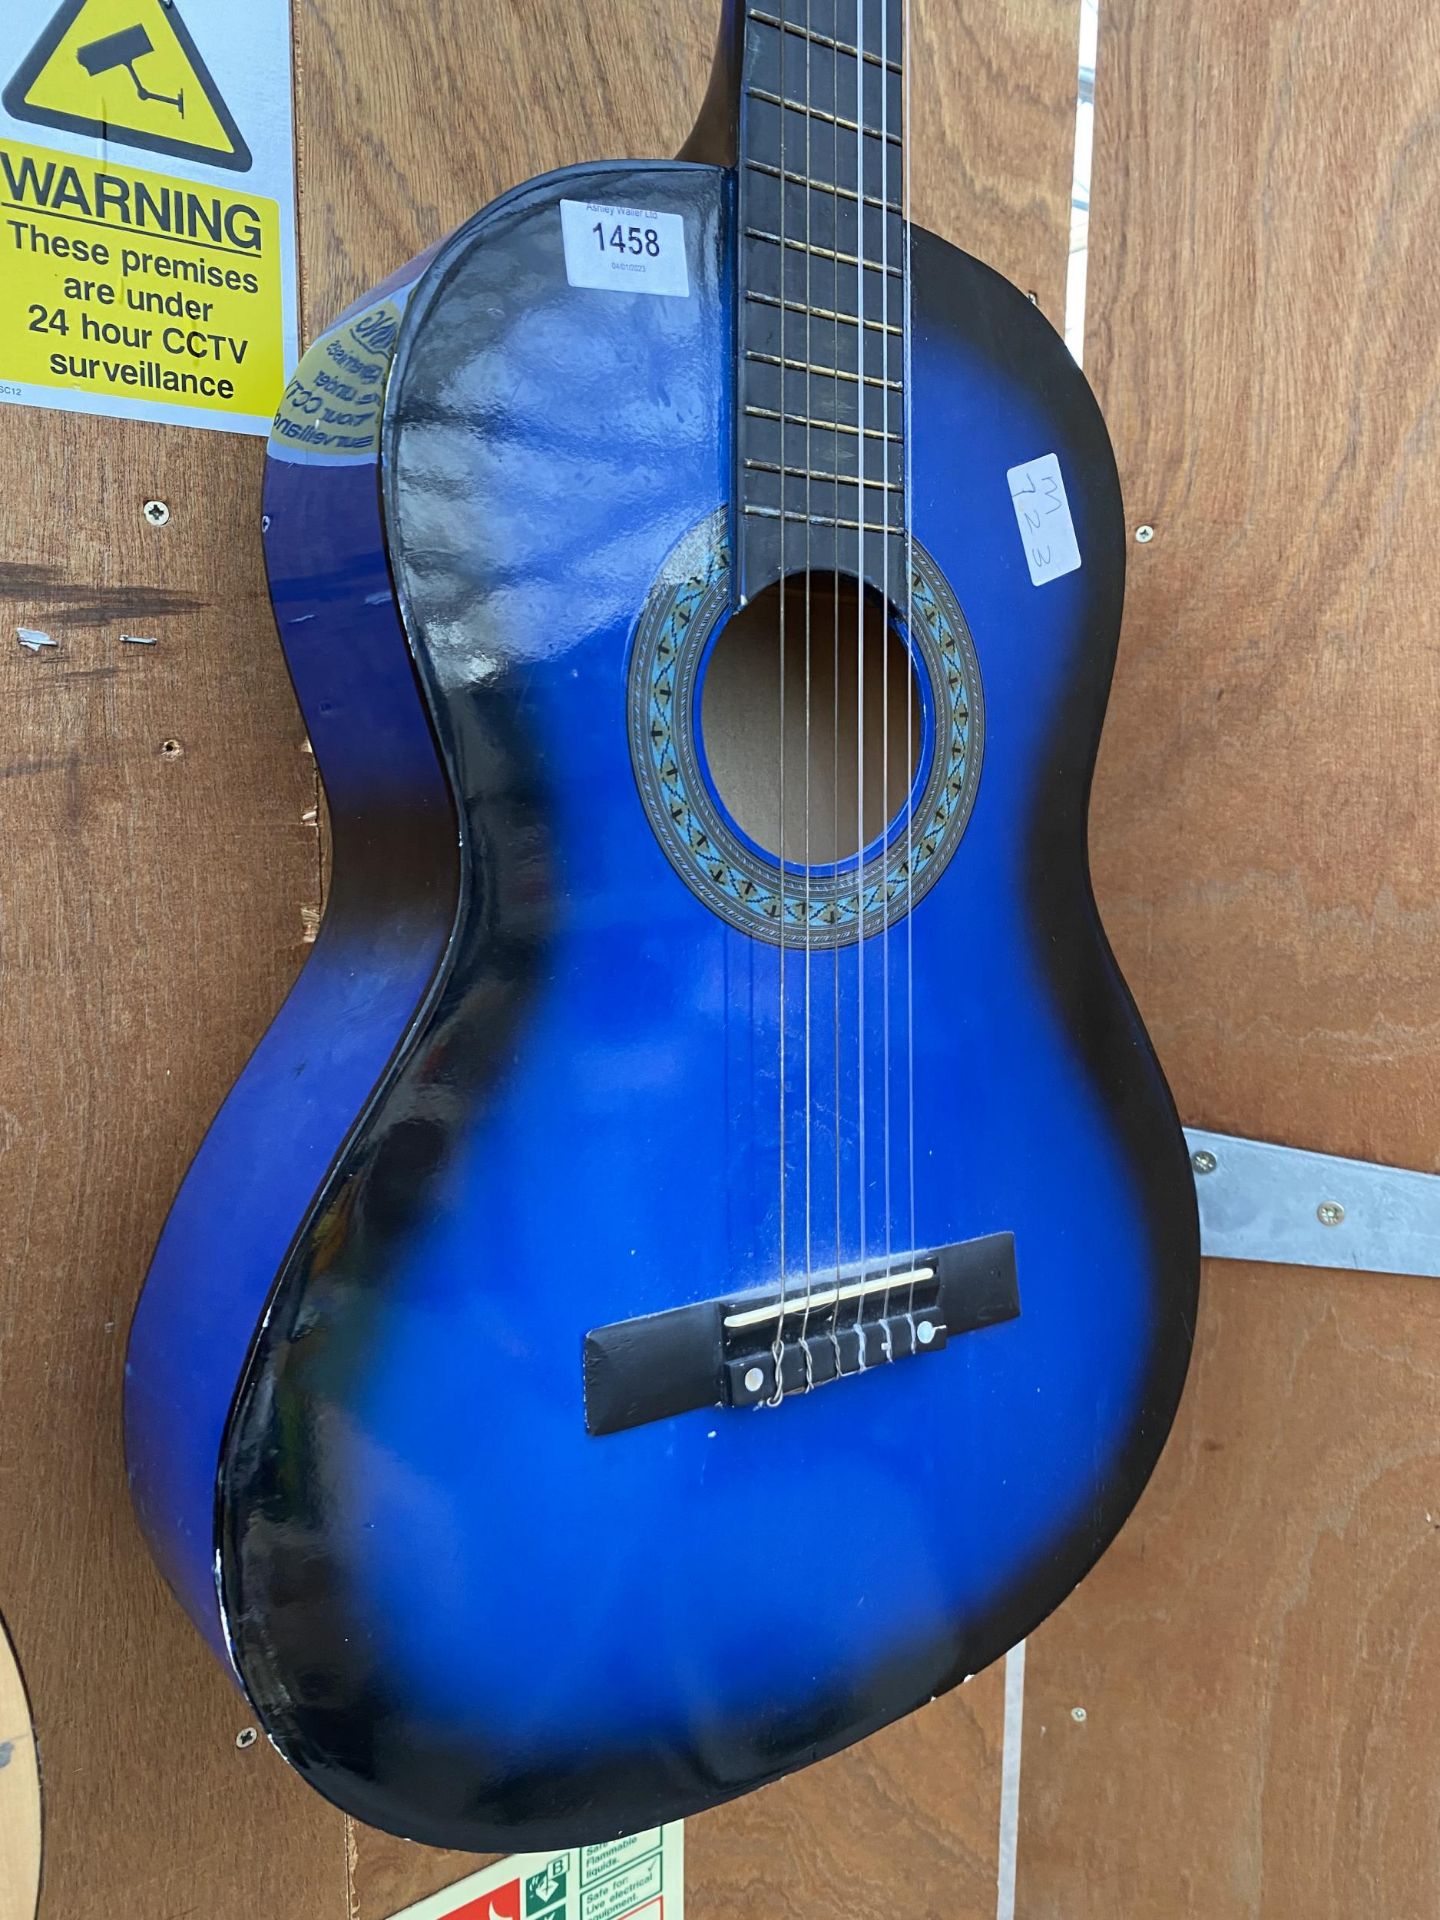 A BLUE ACOUSTIC GUITAR - Image 2 of 3